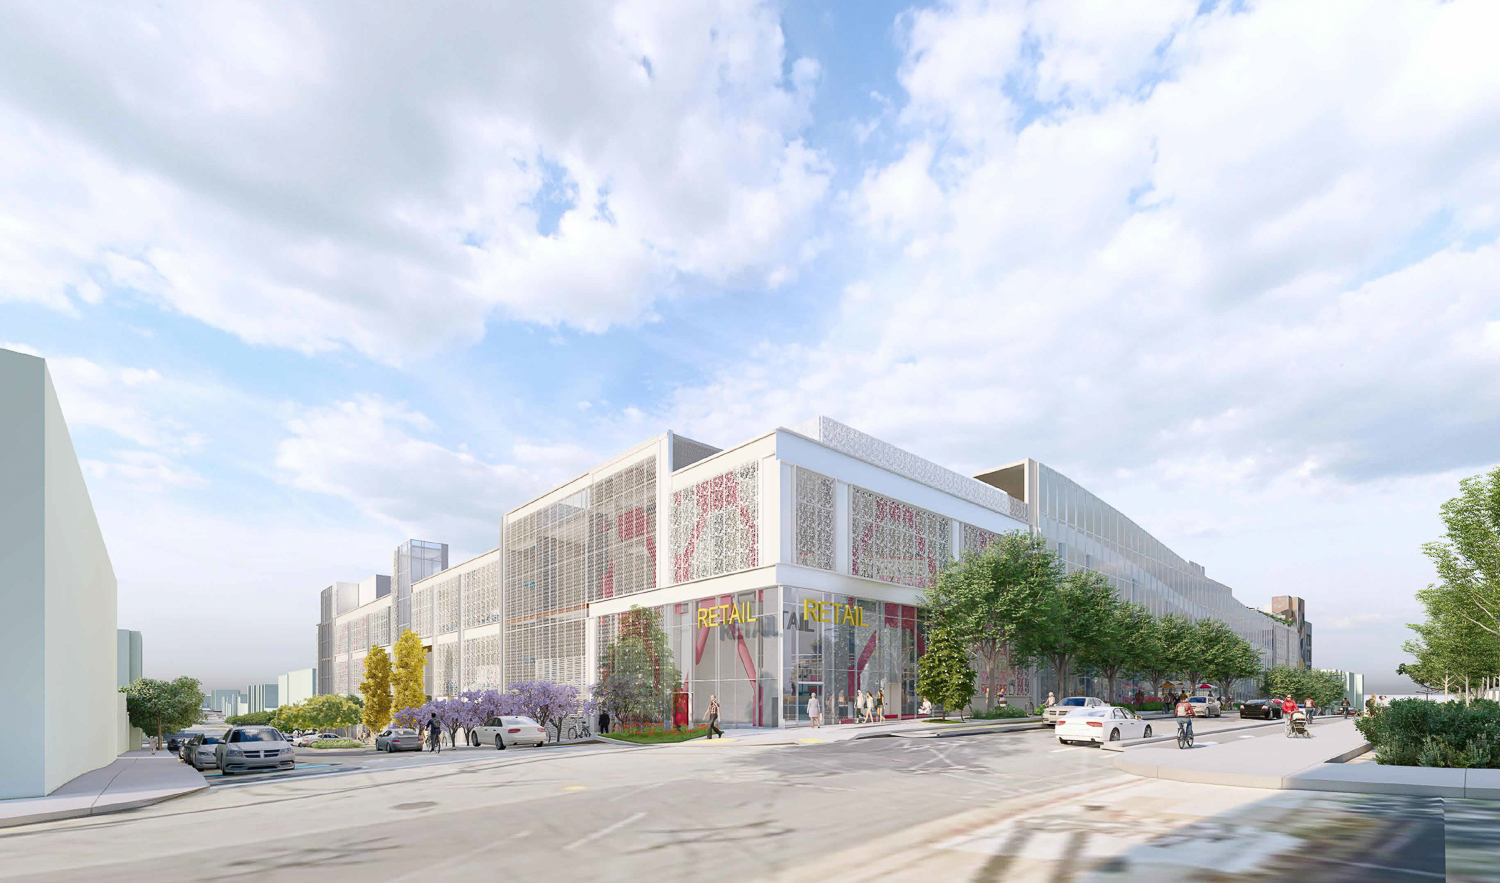 SFMTA Potrero Yard Redevelopment Refined Project Variant view from Hampshire and Mariposa Street, rendering by Arcadis